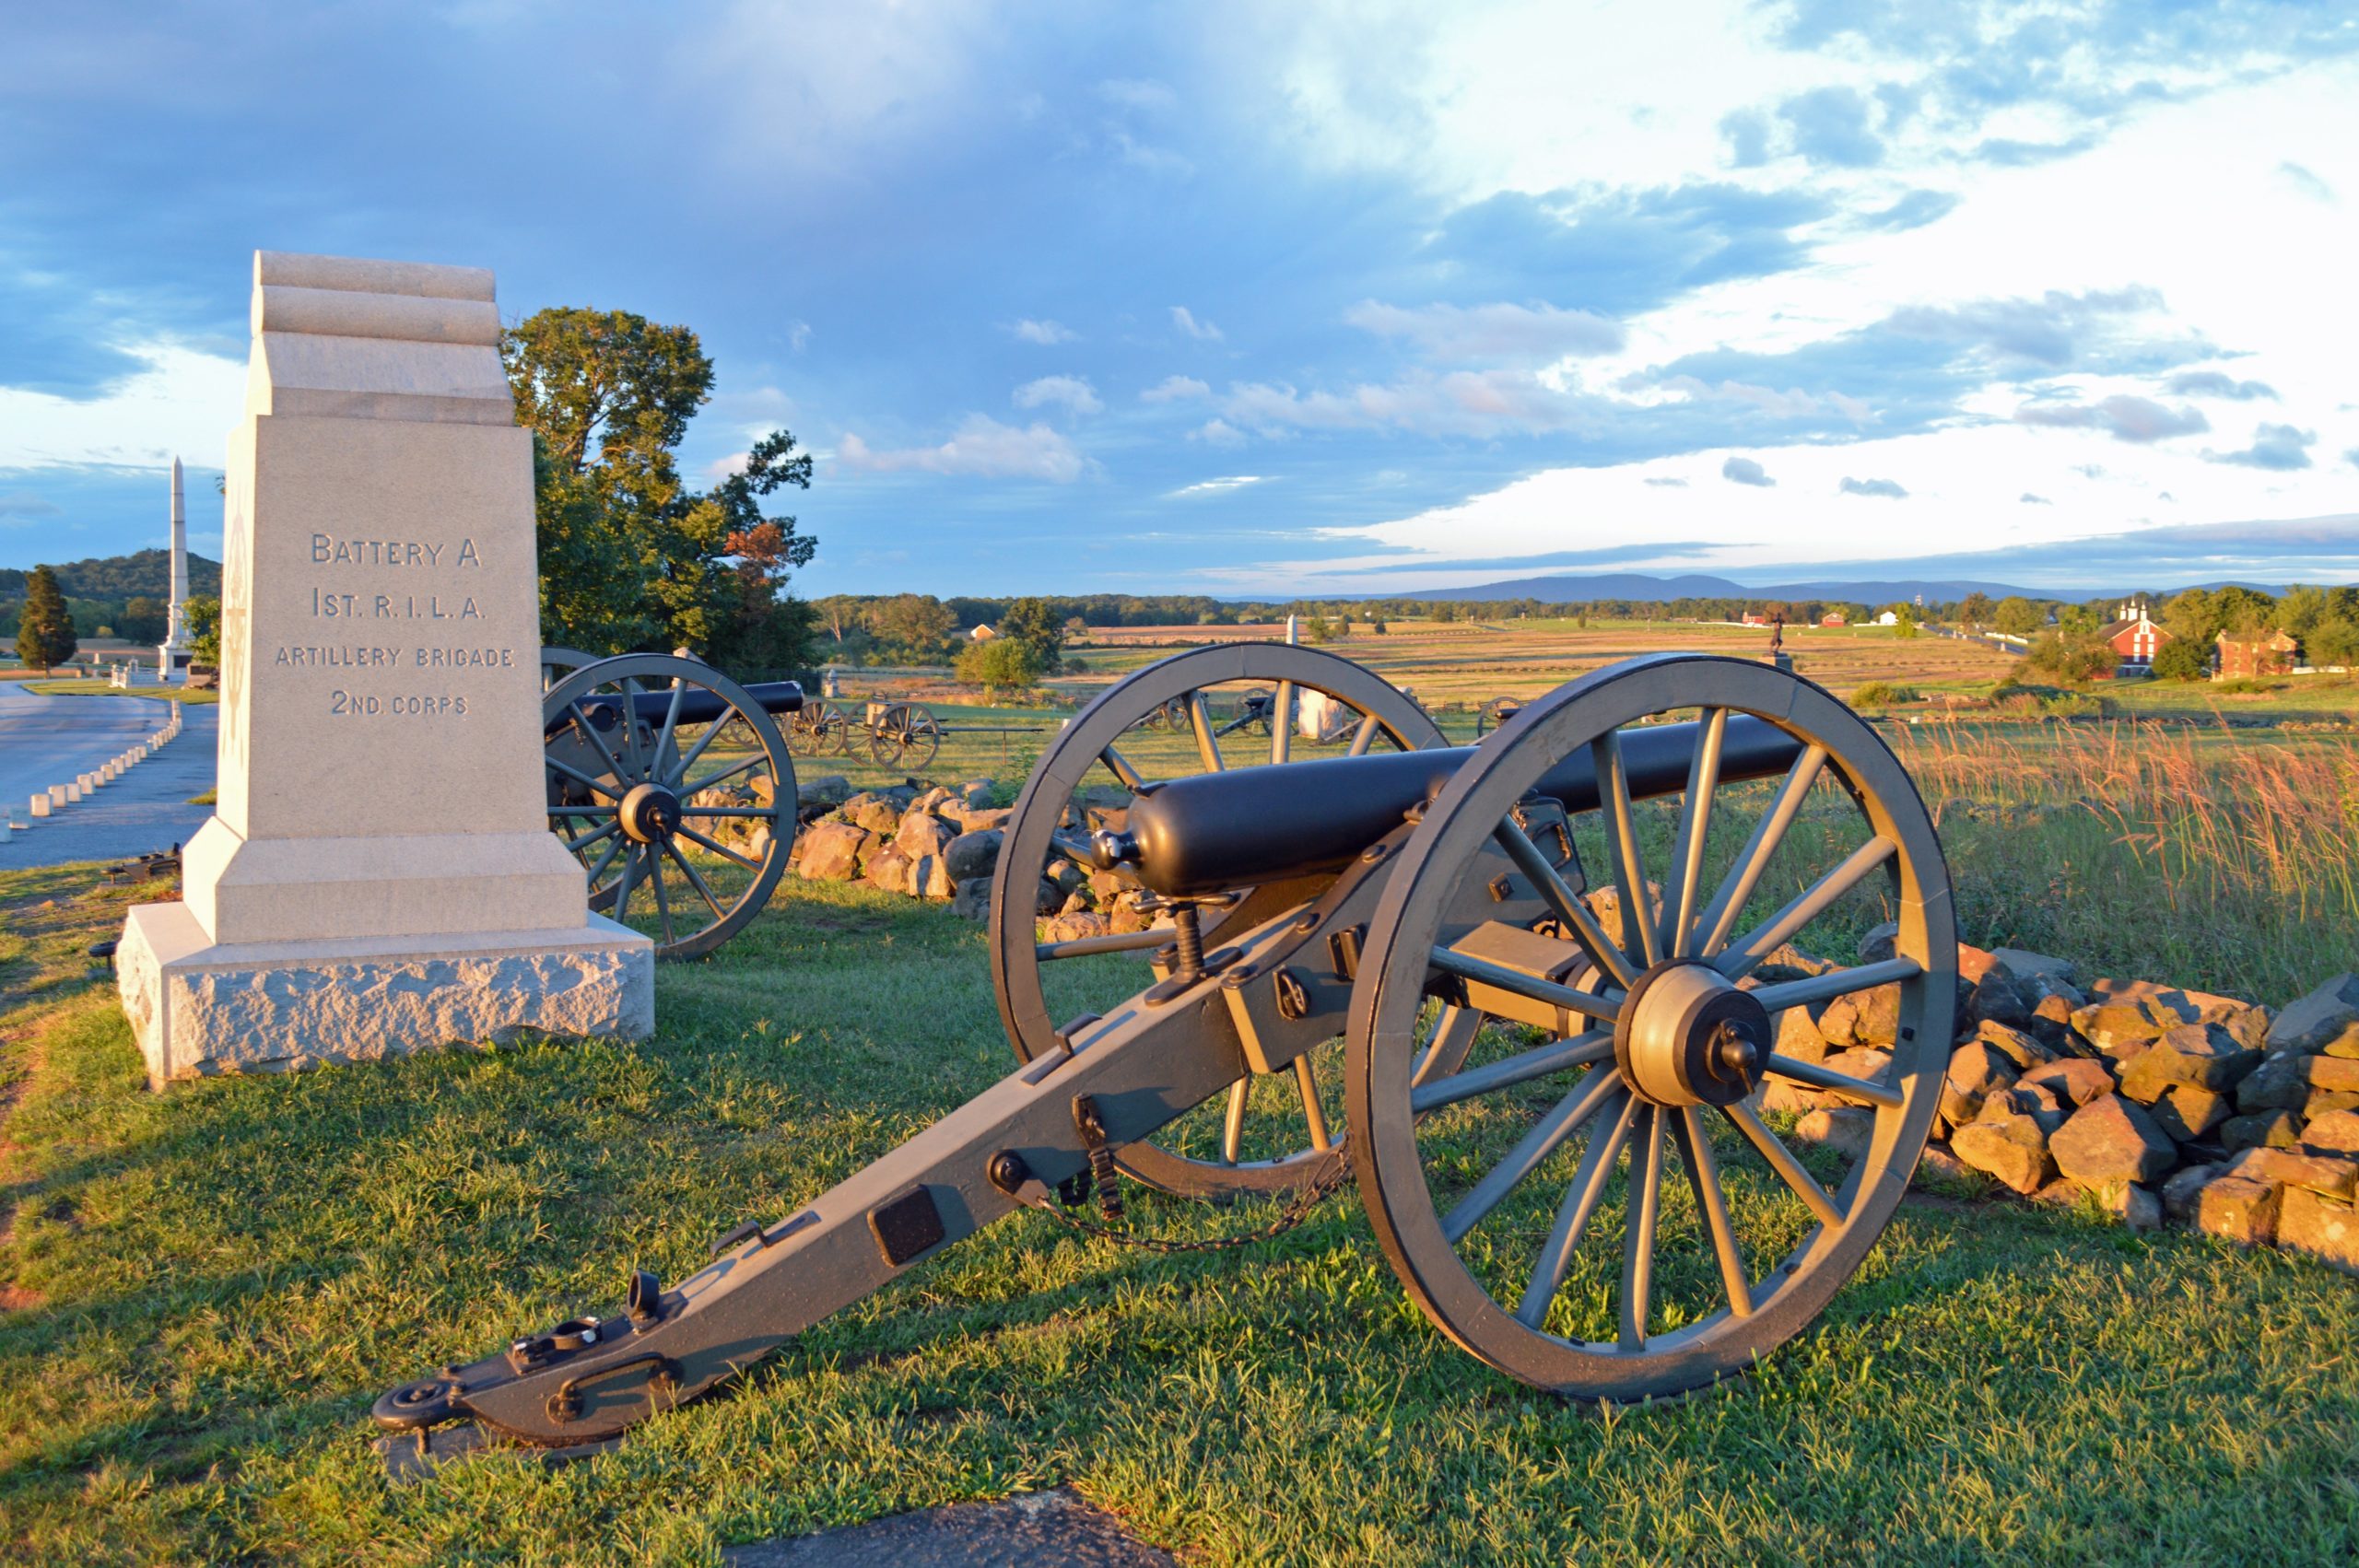 historical places to visit in gettysburg